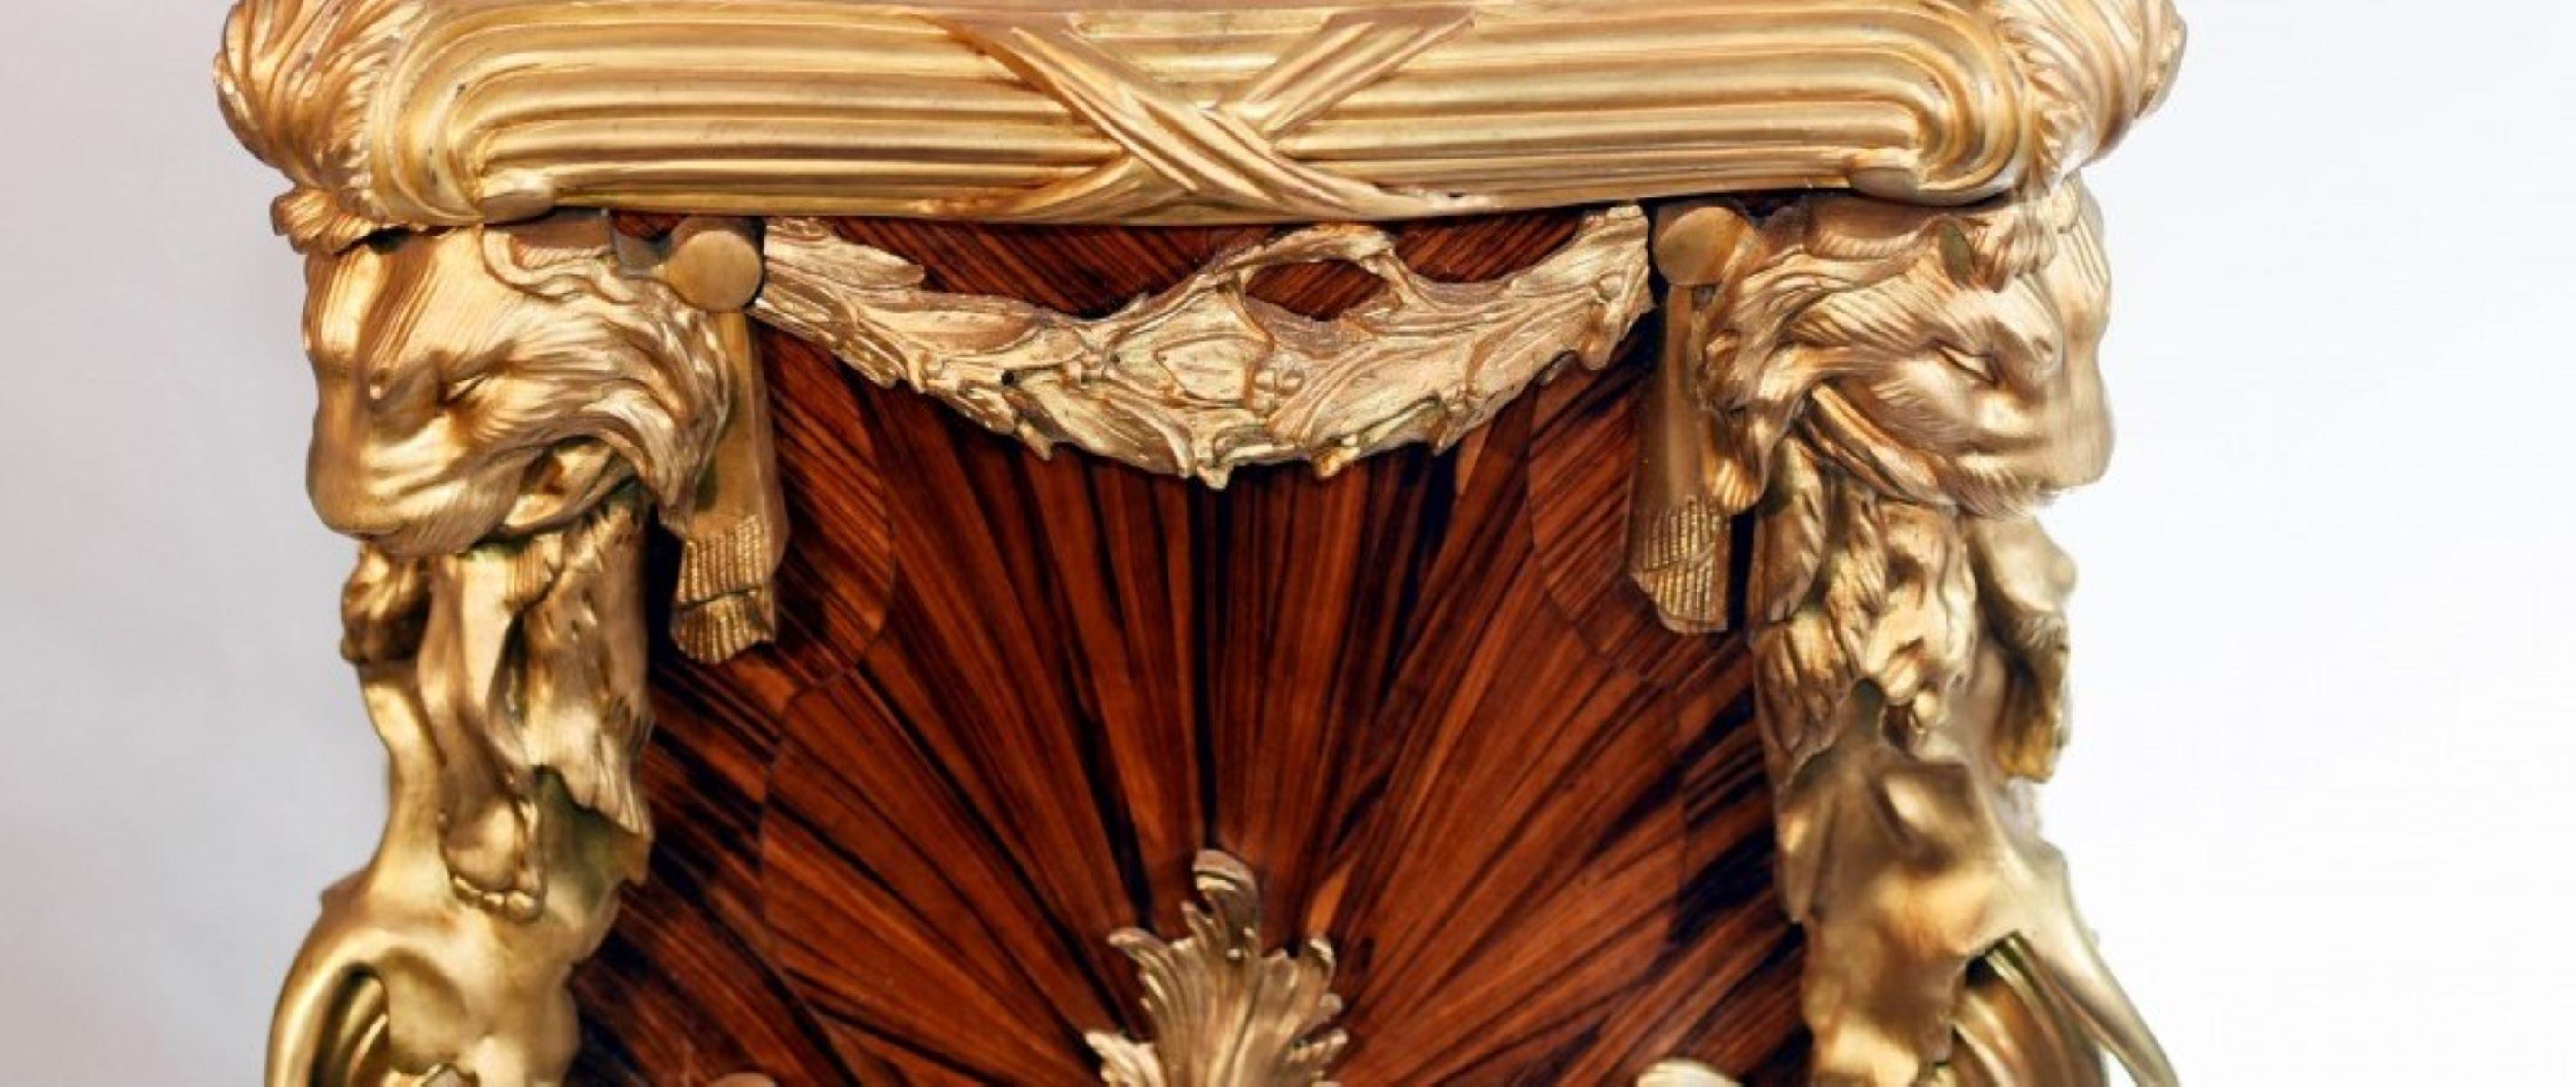 A Fabulous Pair of Linke Style Marble Topped Marquetry inlaid Pedestals
Francois linke (1855-1946) was a well known Cabinet Maker of the late 19th
These Pedestals are made from Kingwood ormolu mounted with lion heads on all four corners and paw